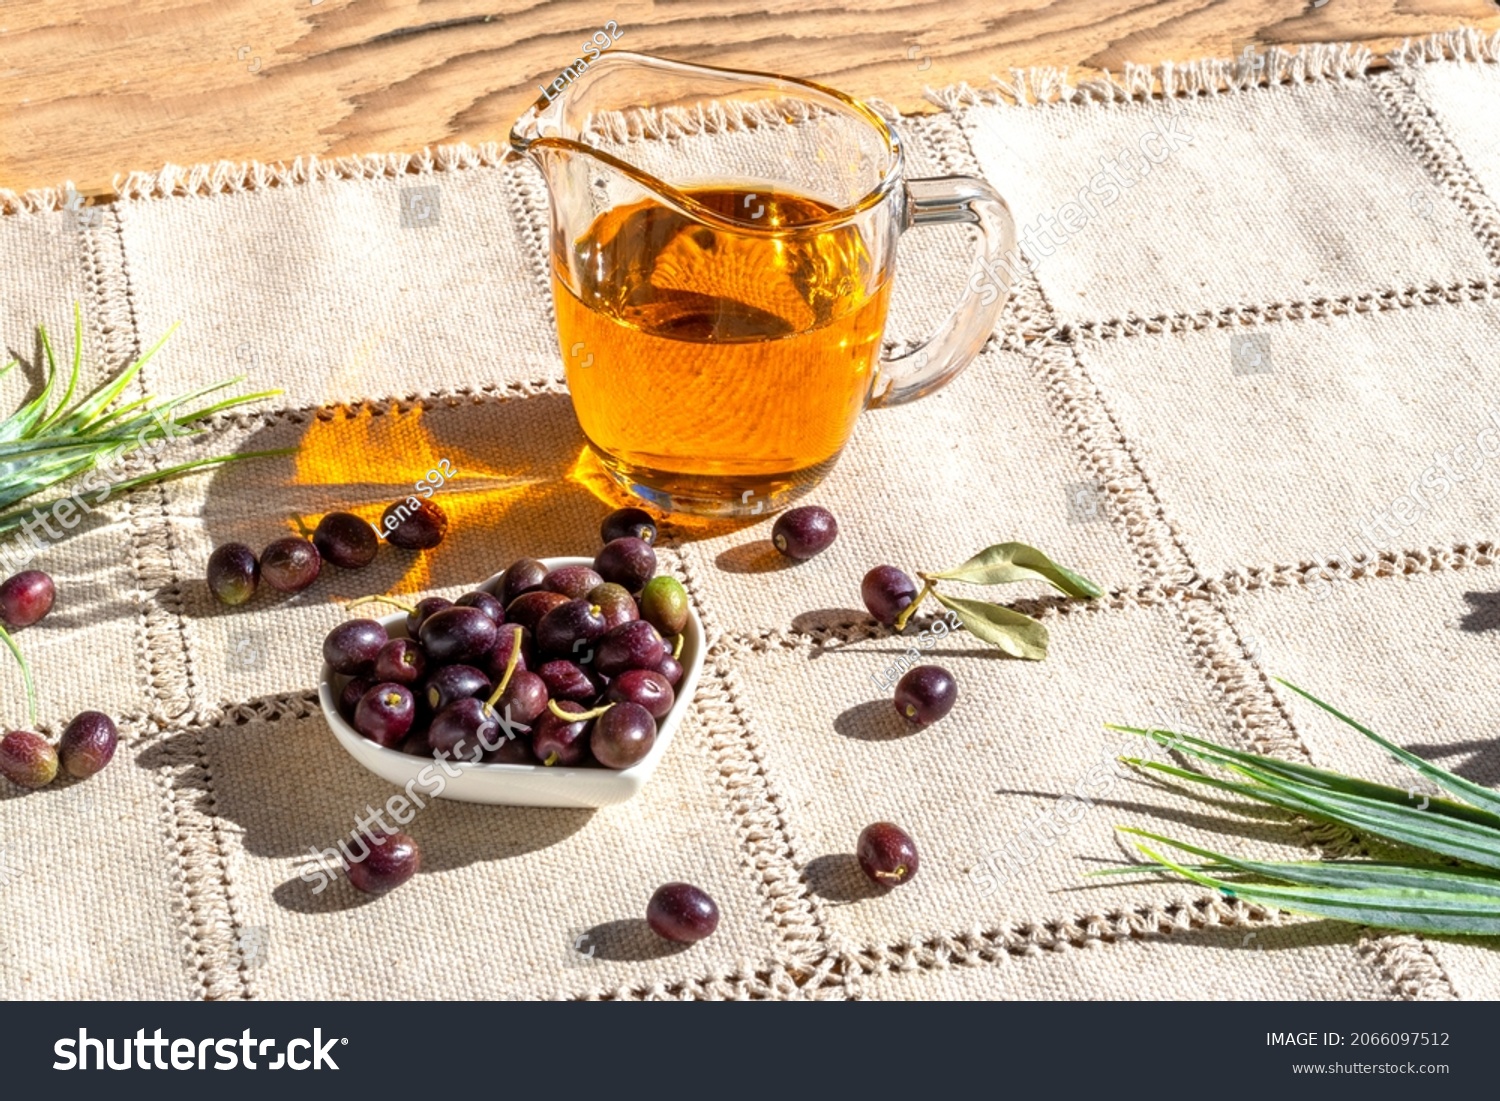 Freshly picked olive tree fruits and olive oil in glass saucepan. First cold pressed oil. Olea europaea. Napkin made of unpainted linen in rustic style #2066097512